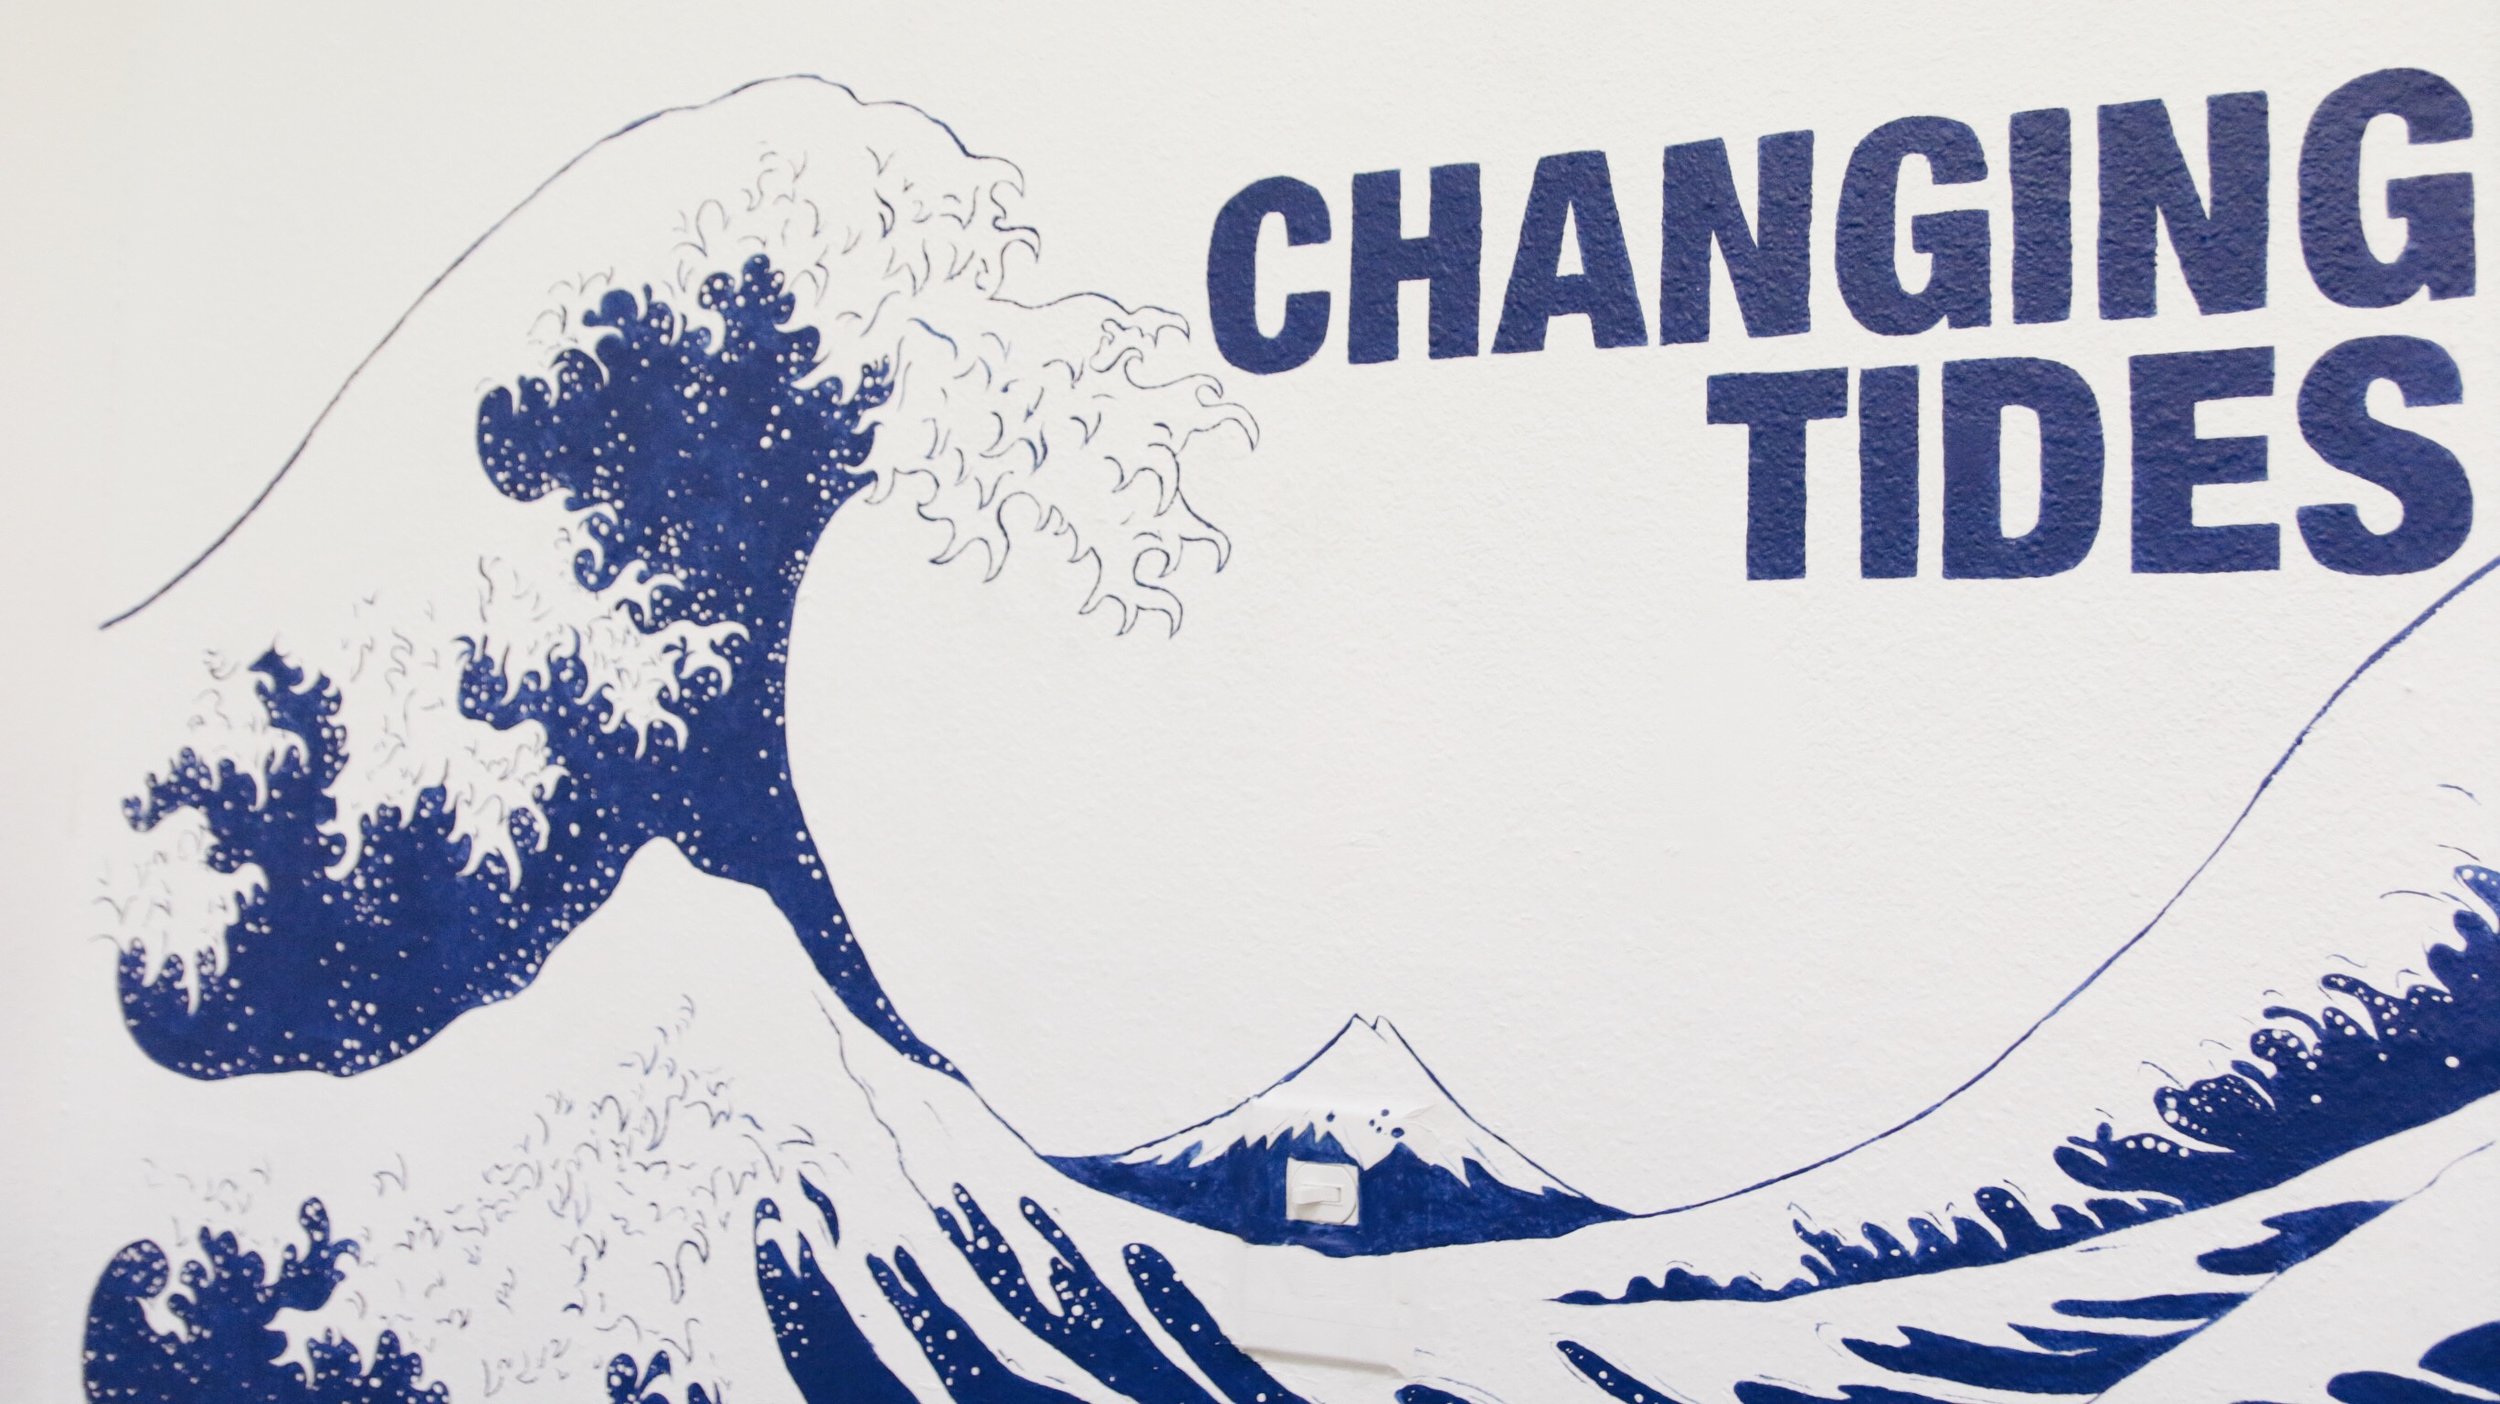 “Changing Tides” is painted on the wall with the logo of a wave.